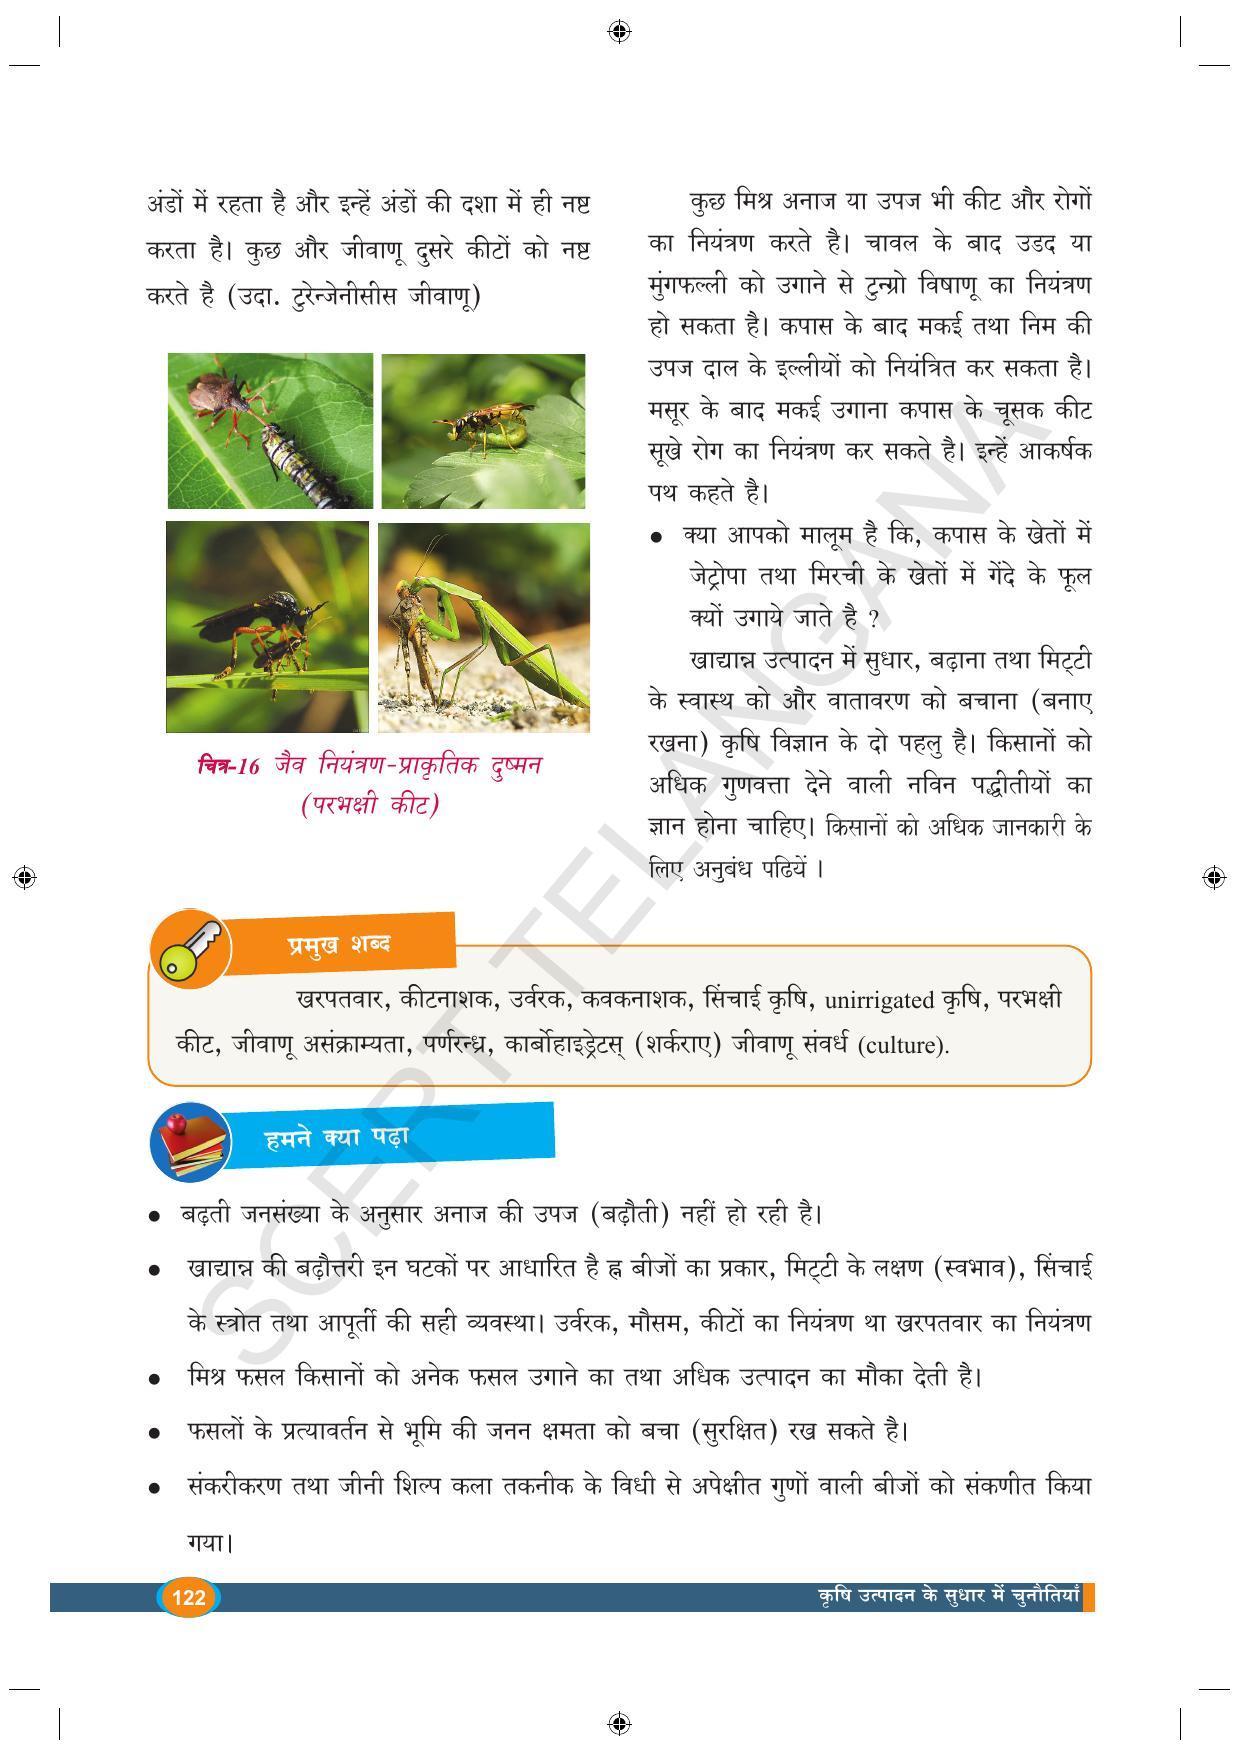 TS SCERT Class 9 Biological Science (Hindi Medium) Text Book - Page 134